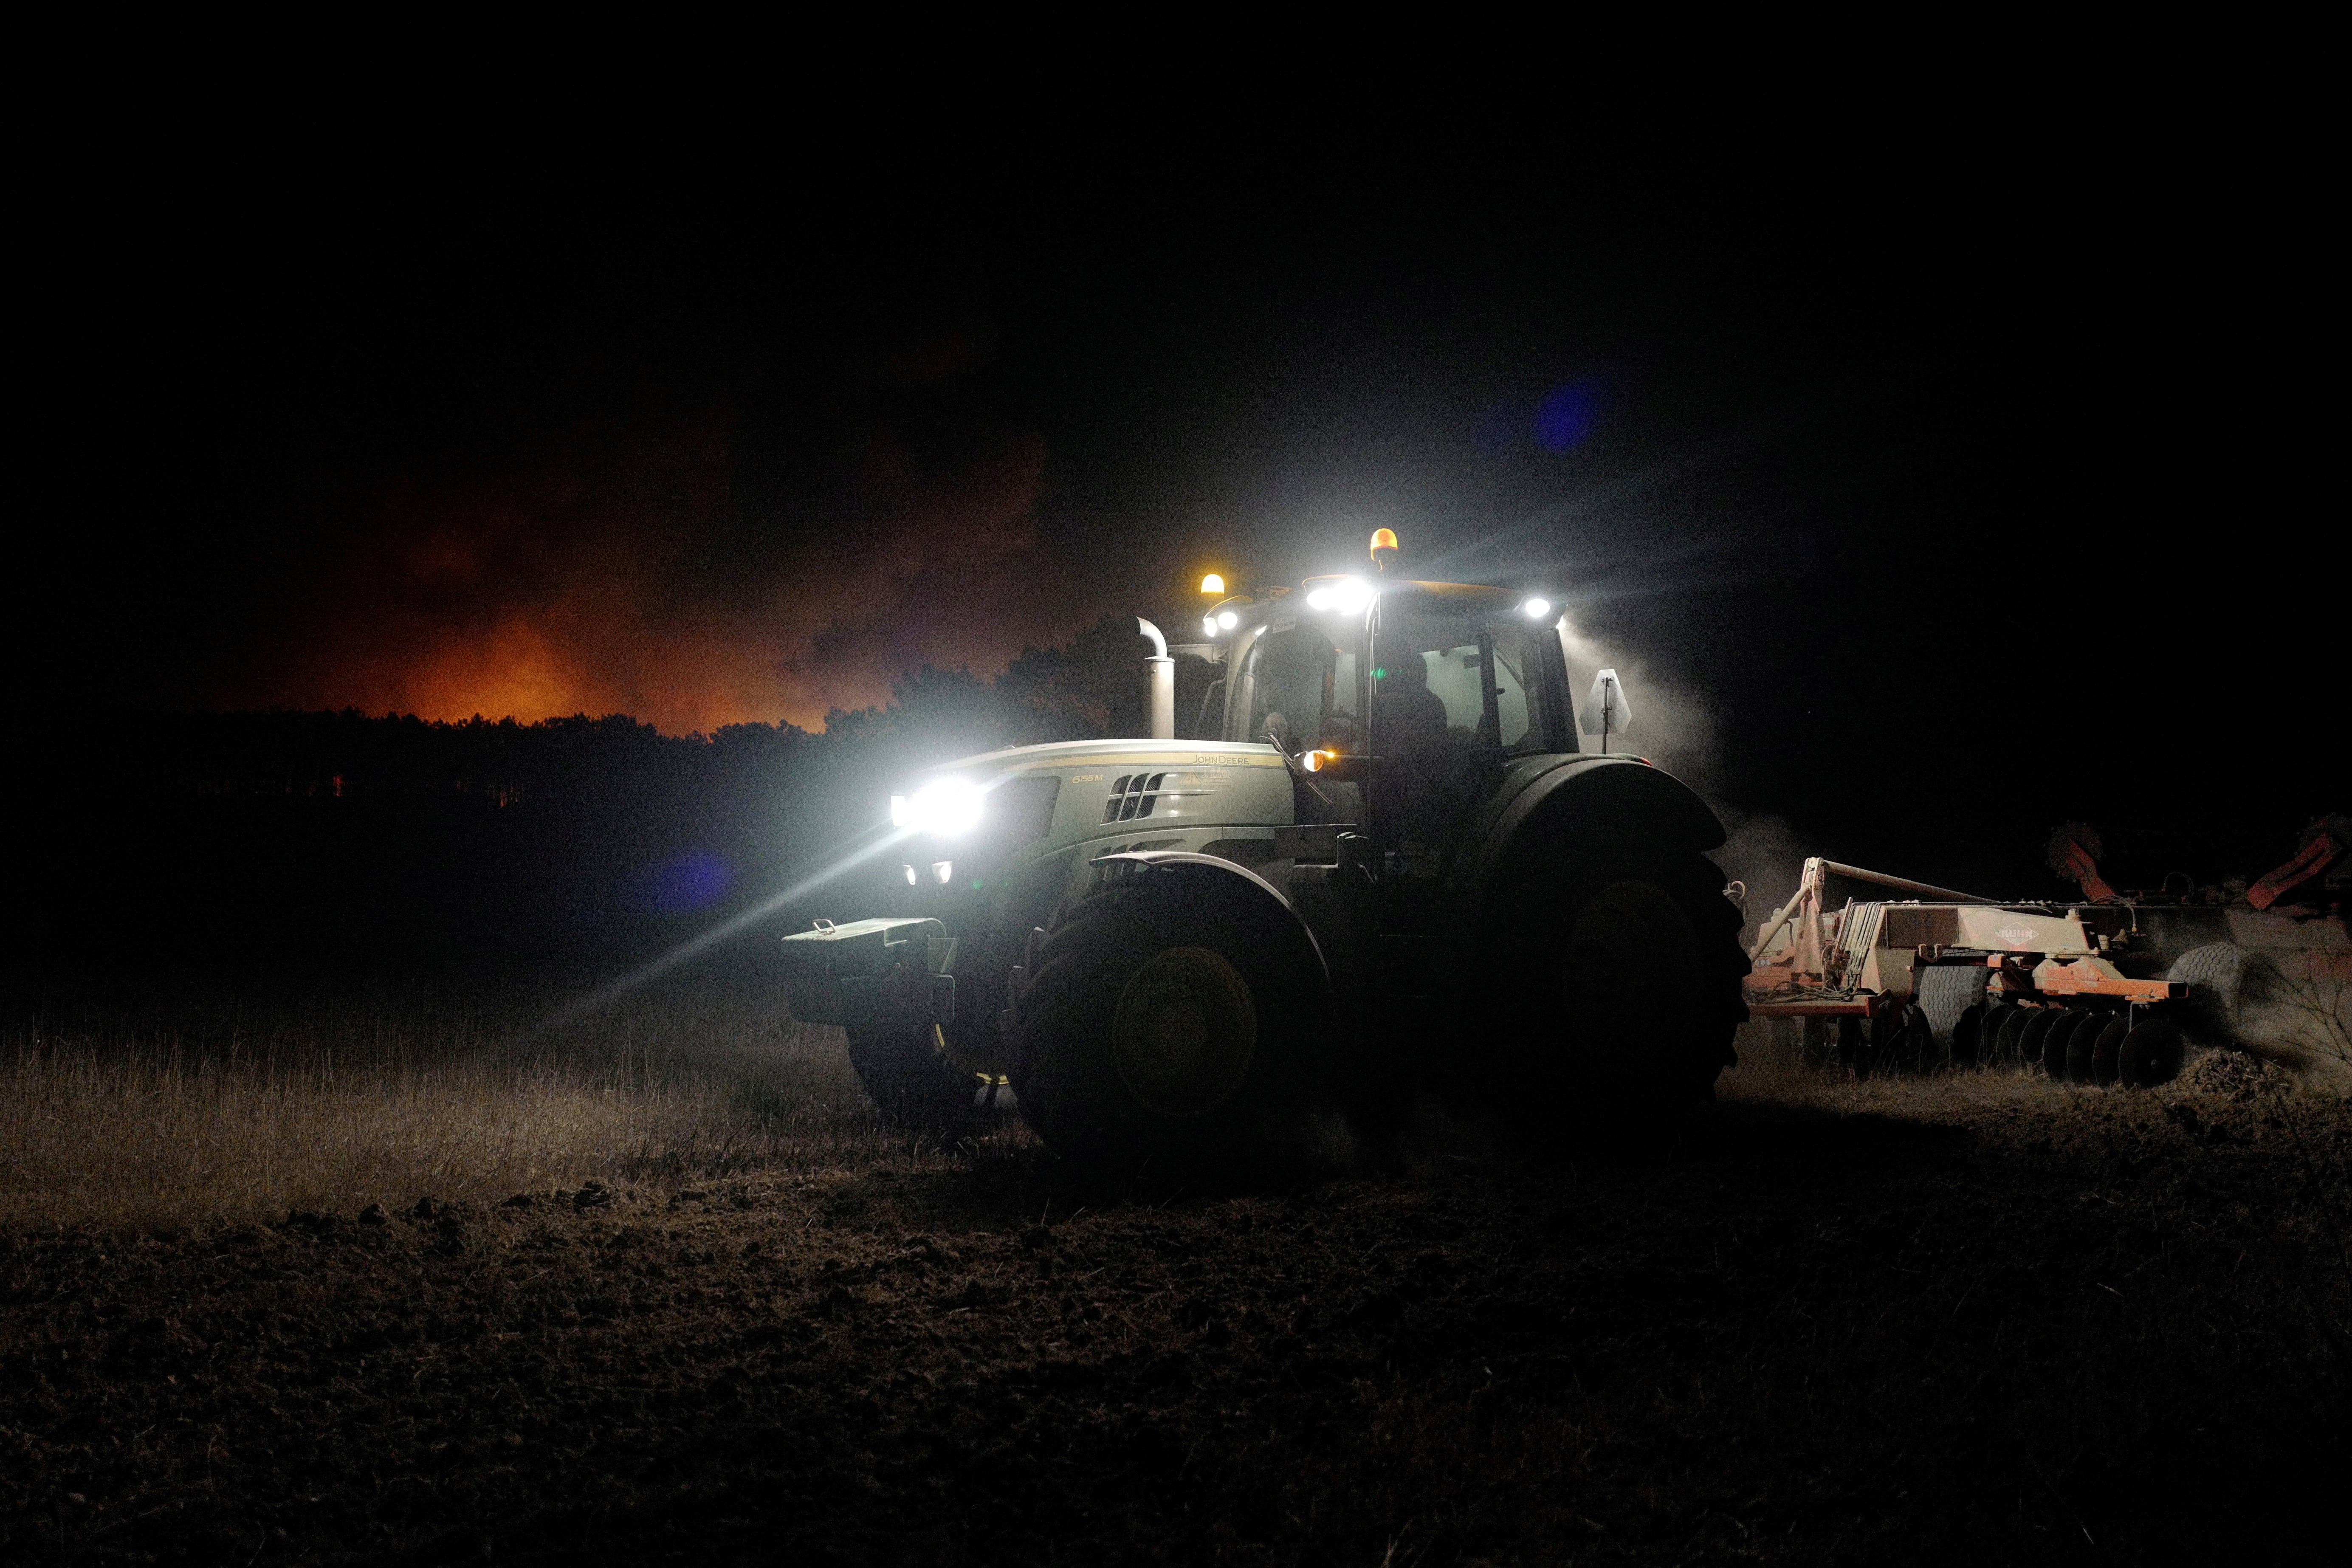 A tractor cleans up land during a wildfire in Aljezur, Portugal